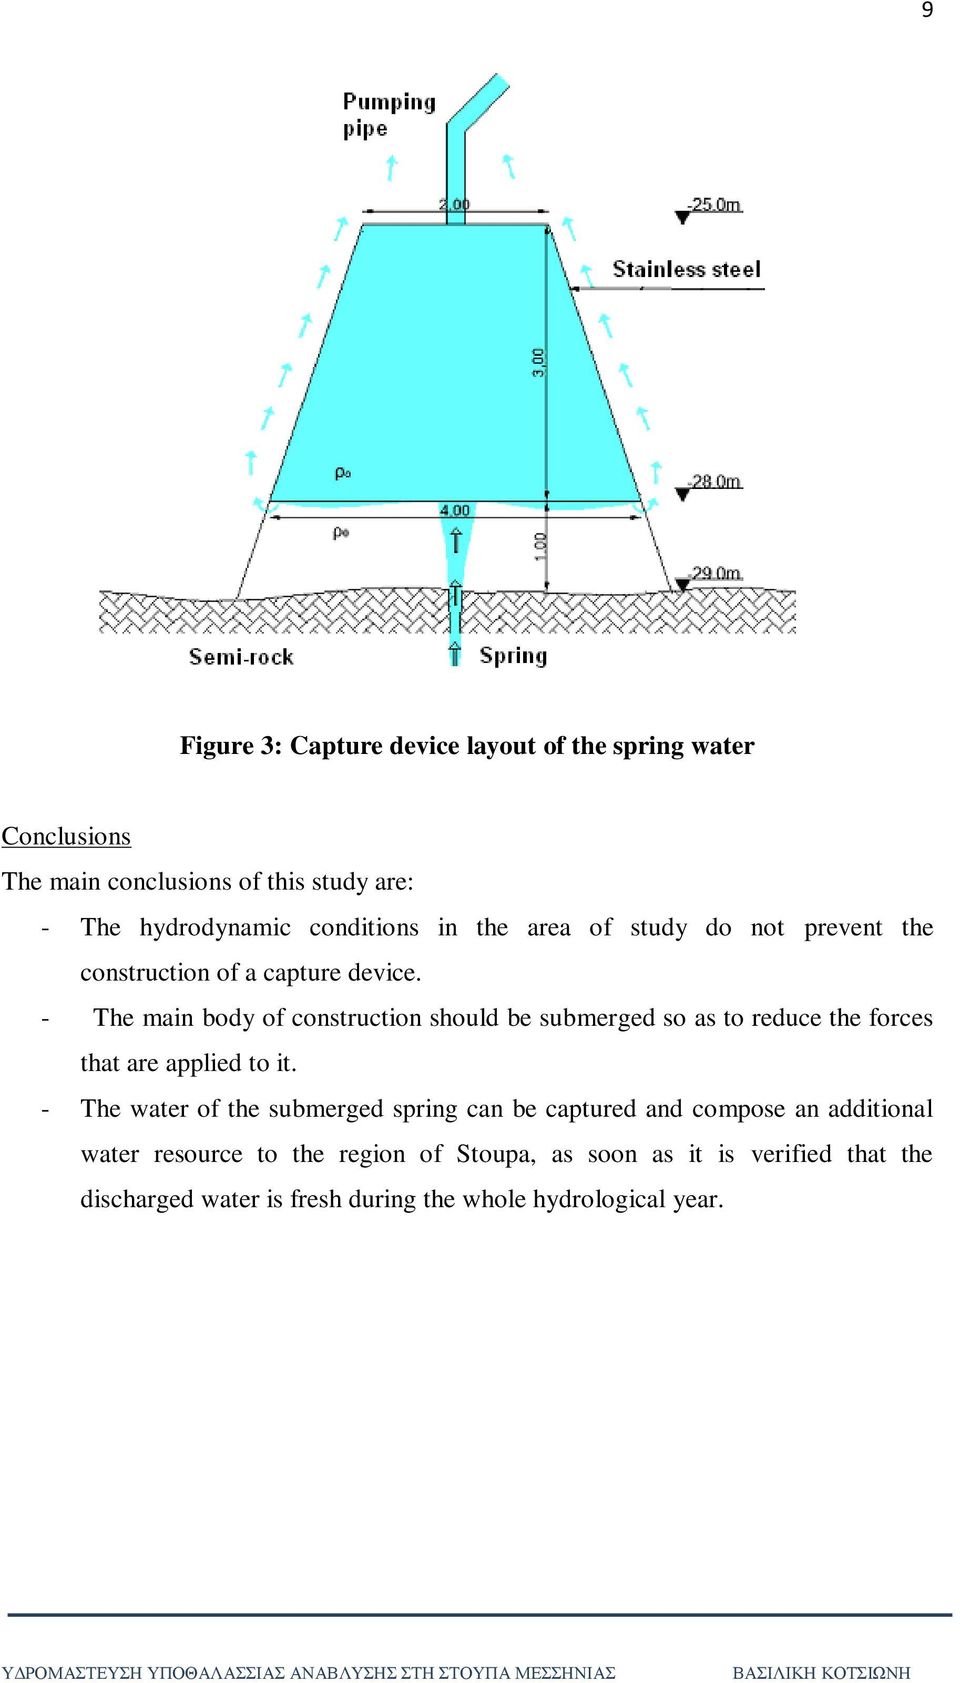 - The main body of construction should be submerged so as to reduce the forces that are applied to it.